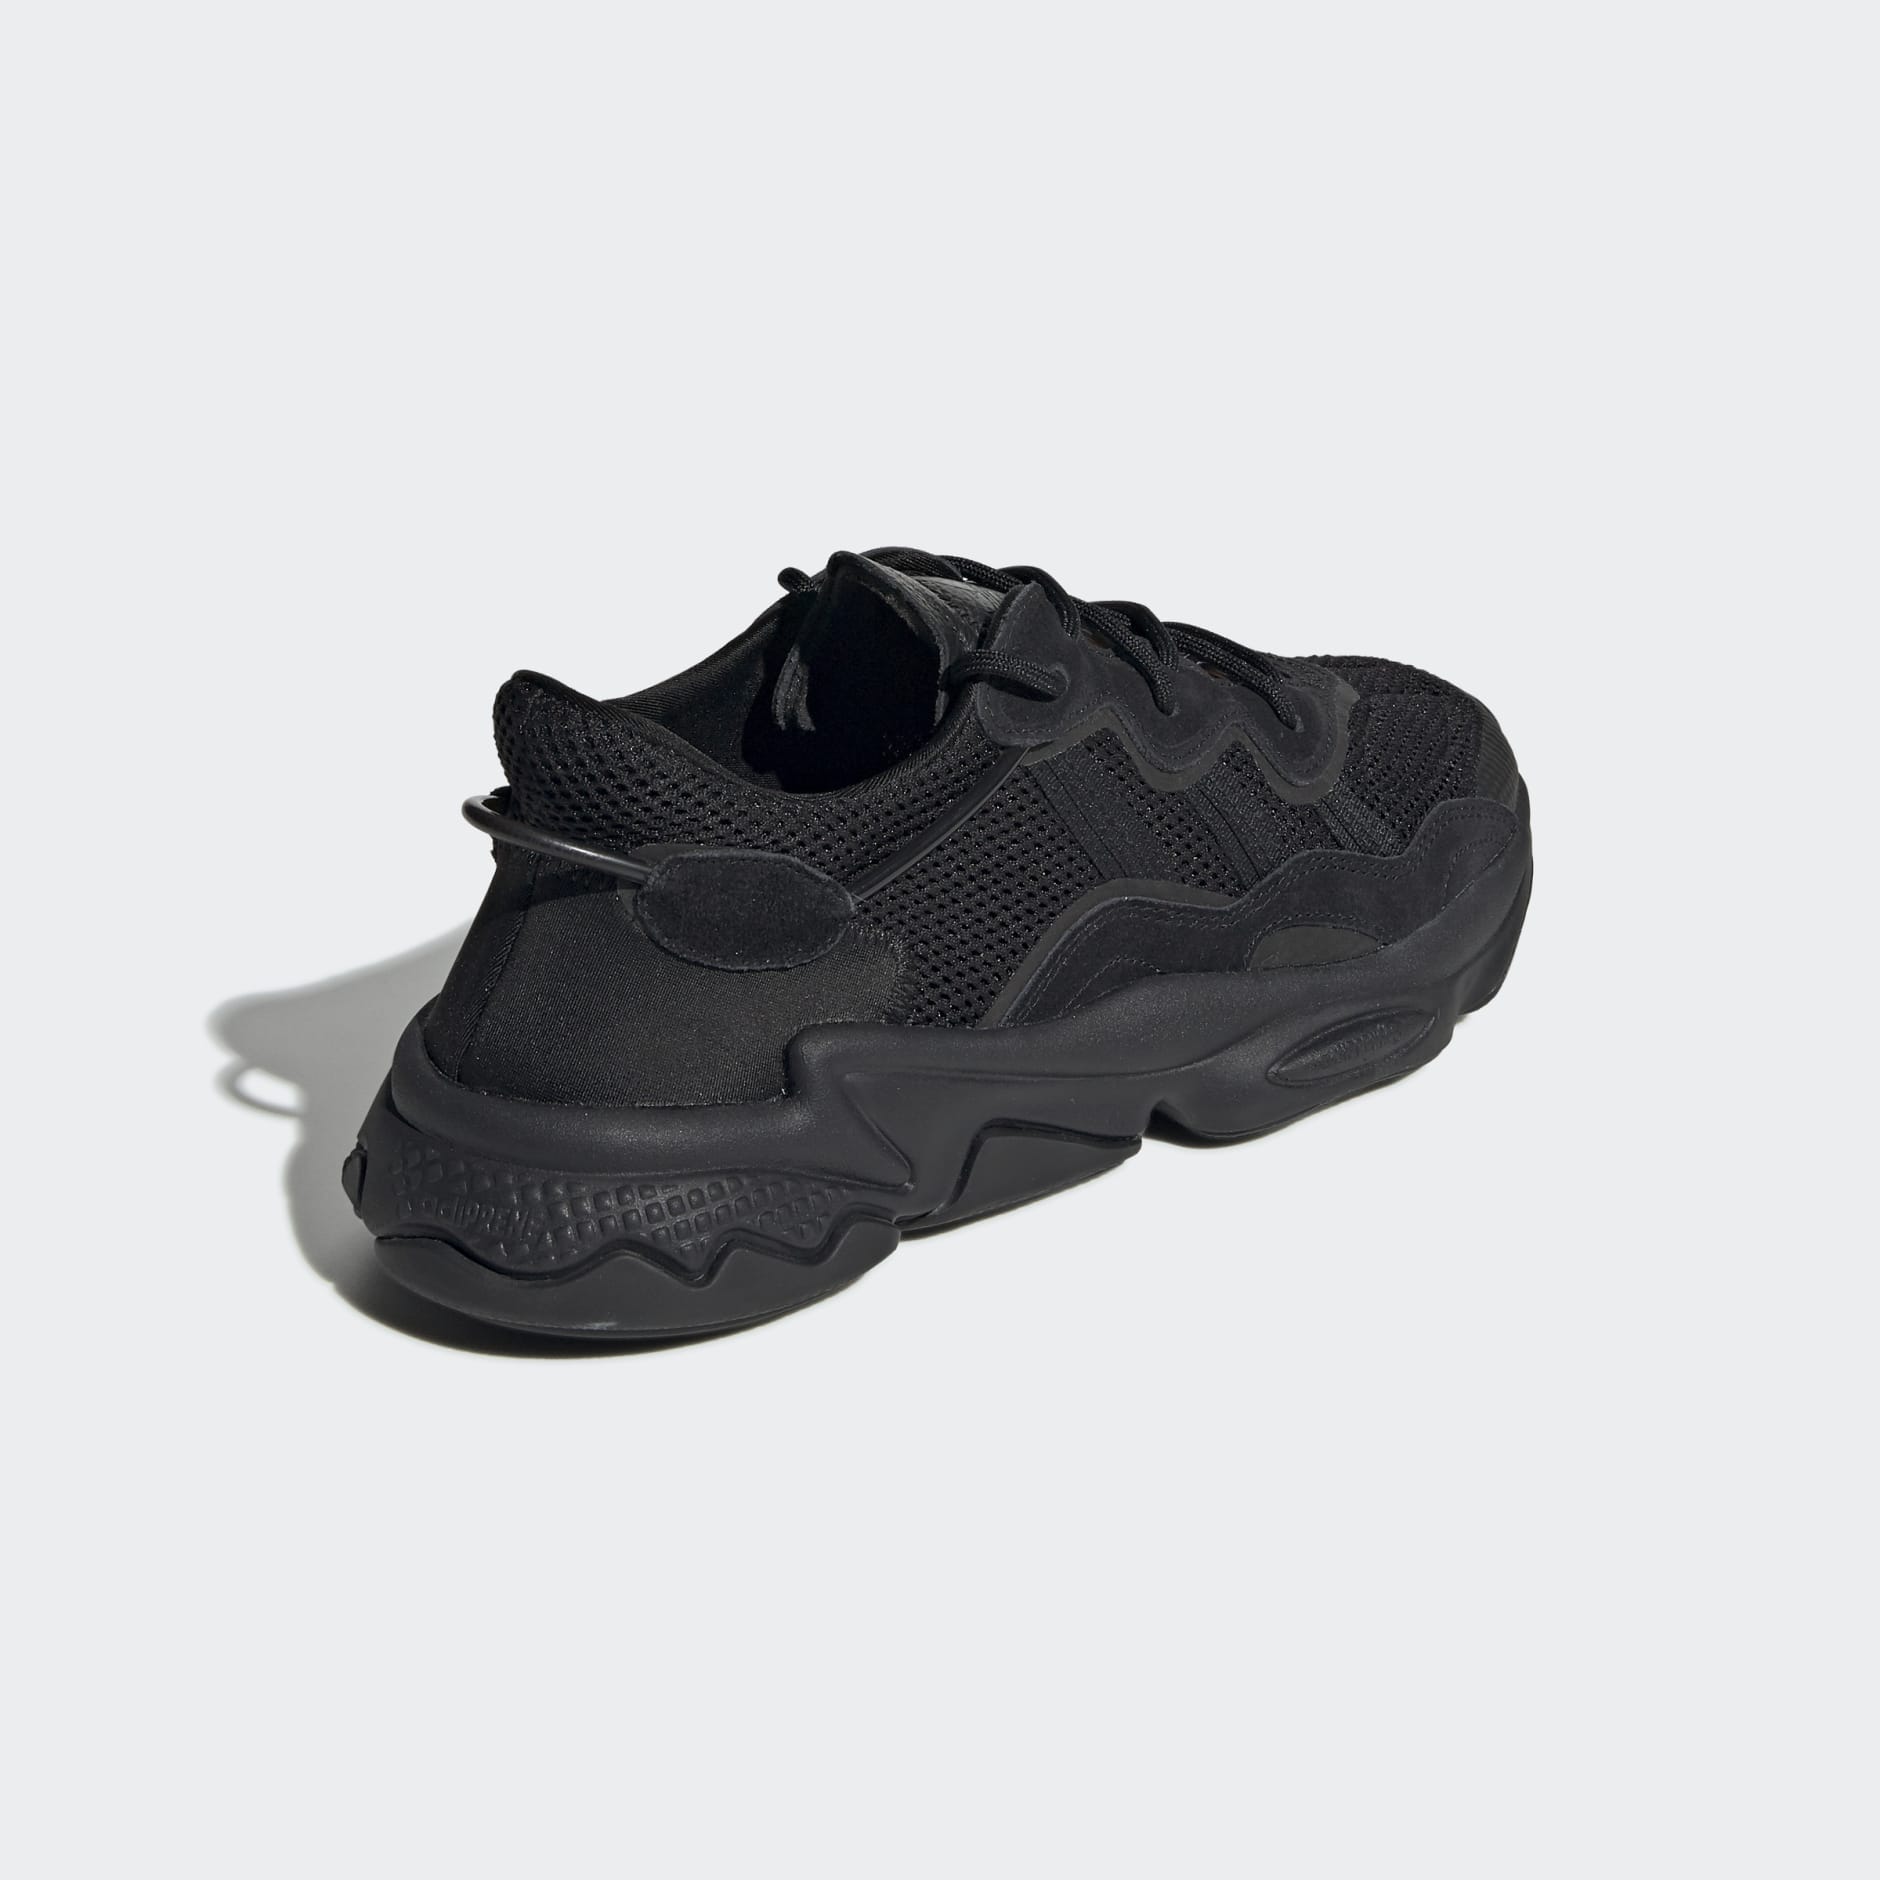 Shoes - OZWEEGO Shoes - Black | adidas South Africa